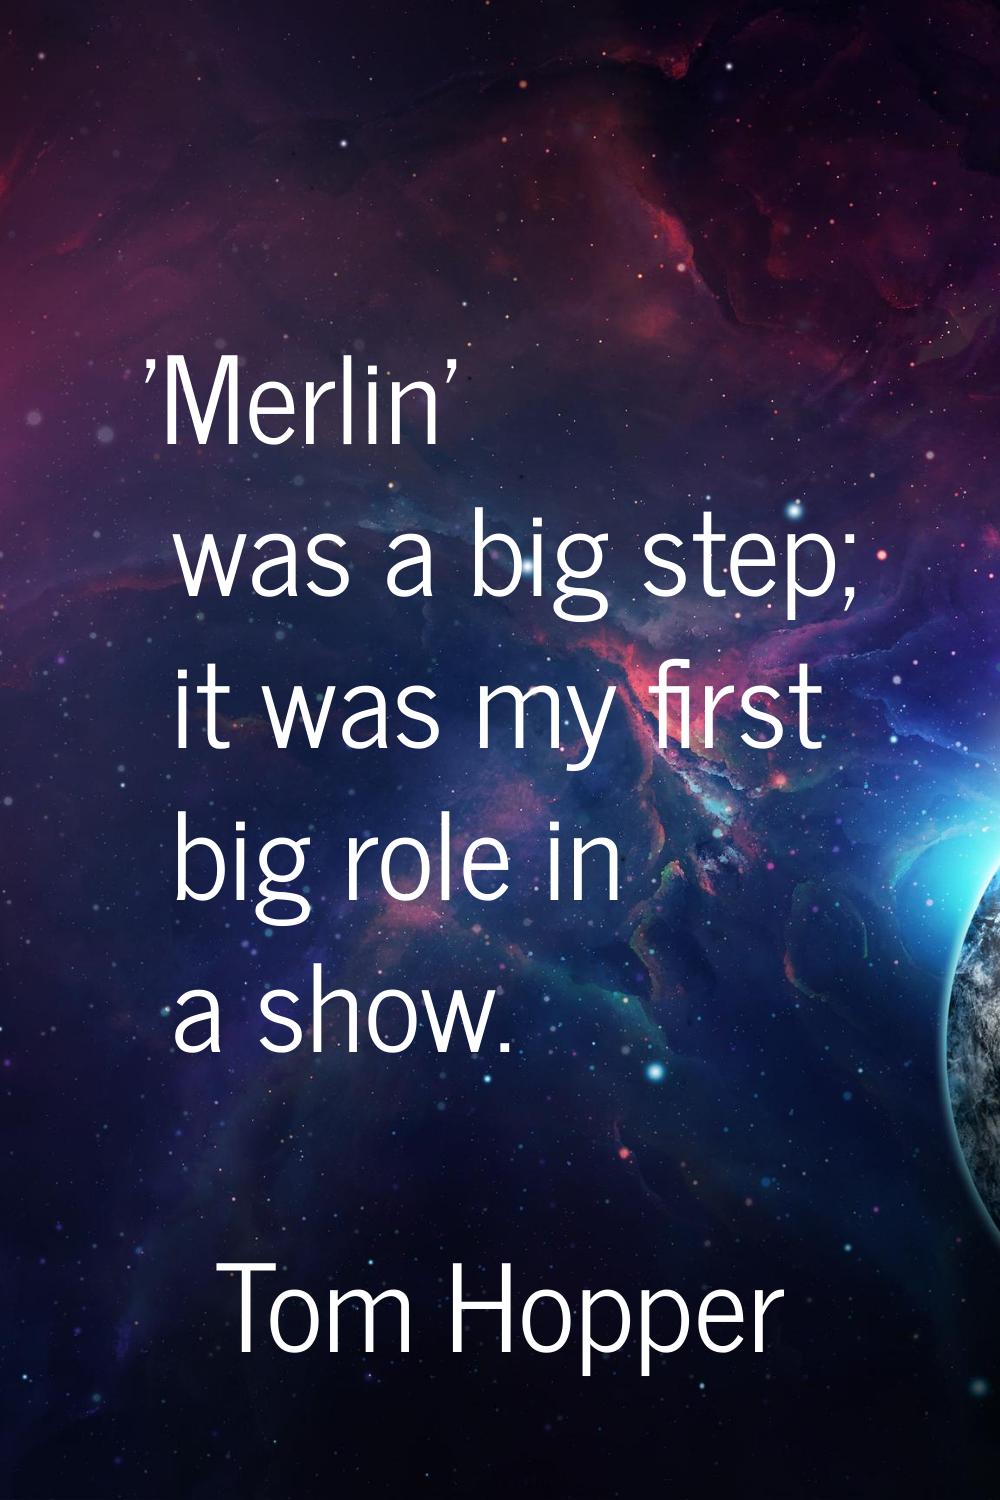 'Merlin' was a big step; it was my first big role in a show.